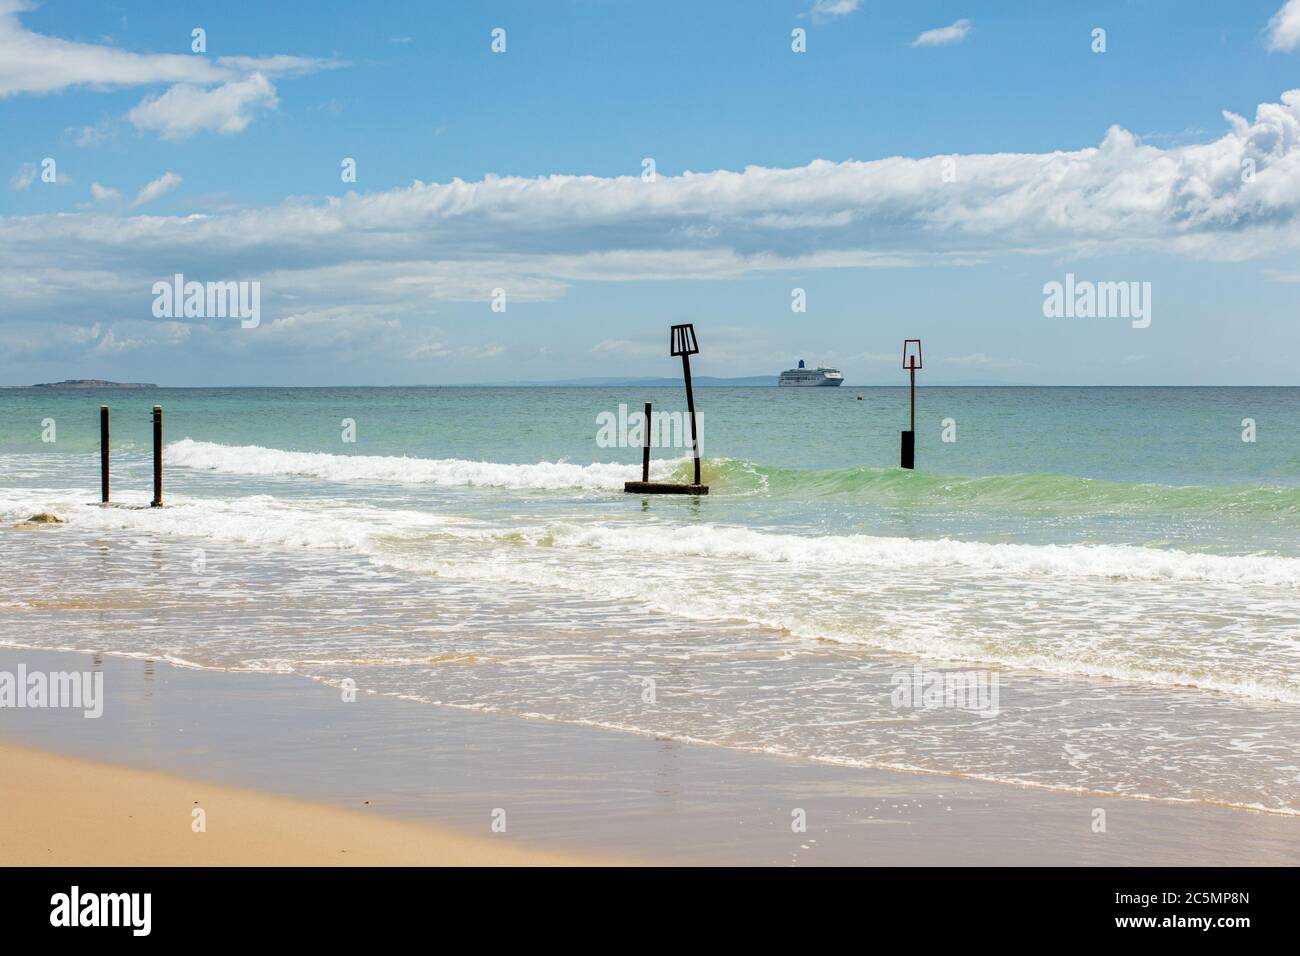 Cruise ship anchored off the coast of the Isle of Wight during the coronavirus outbreak in 2020 as seen from Branksome Chine Beach, Poole, Dorset, UK Stock Photo